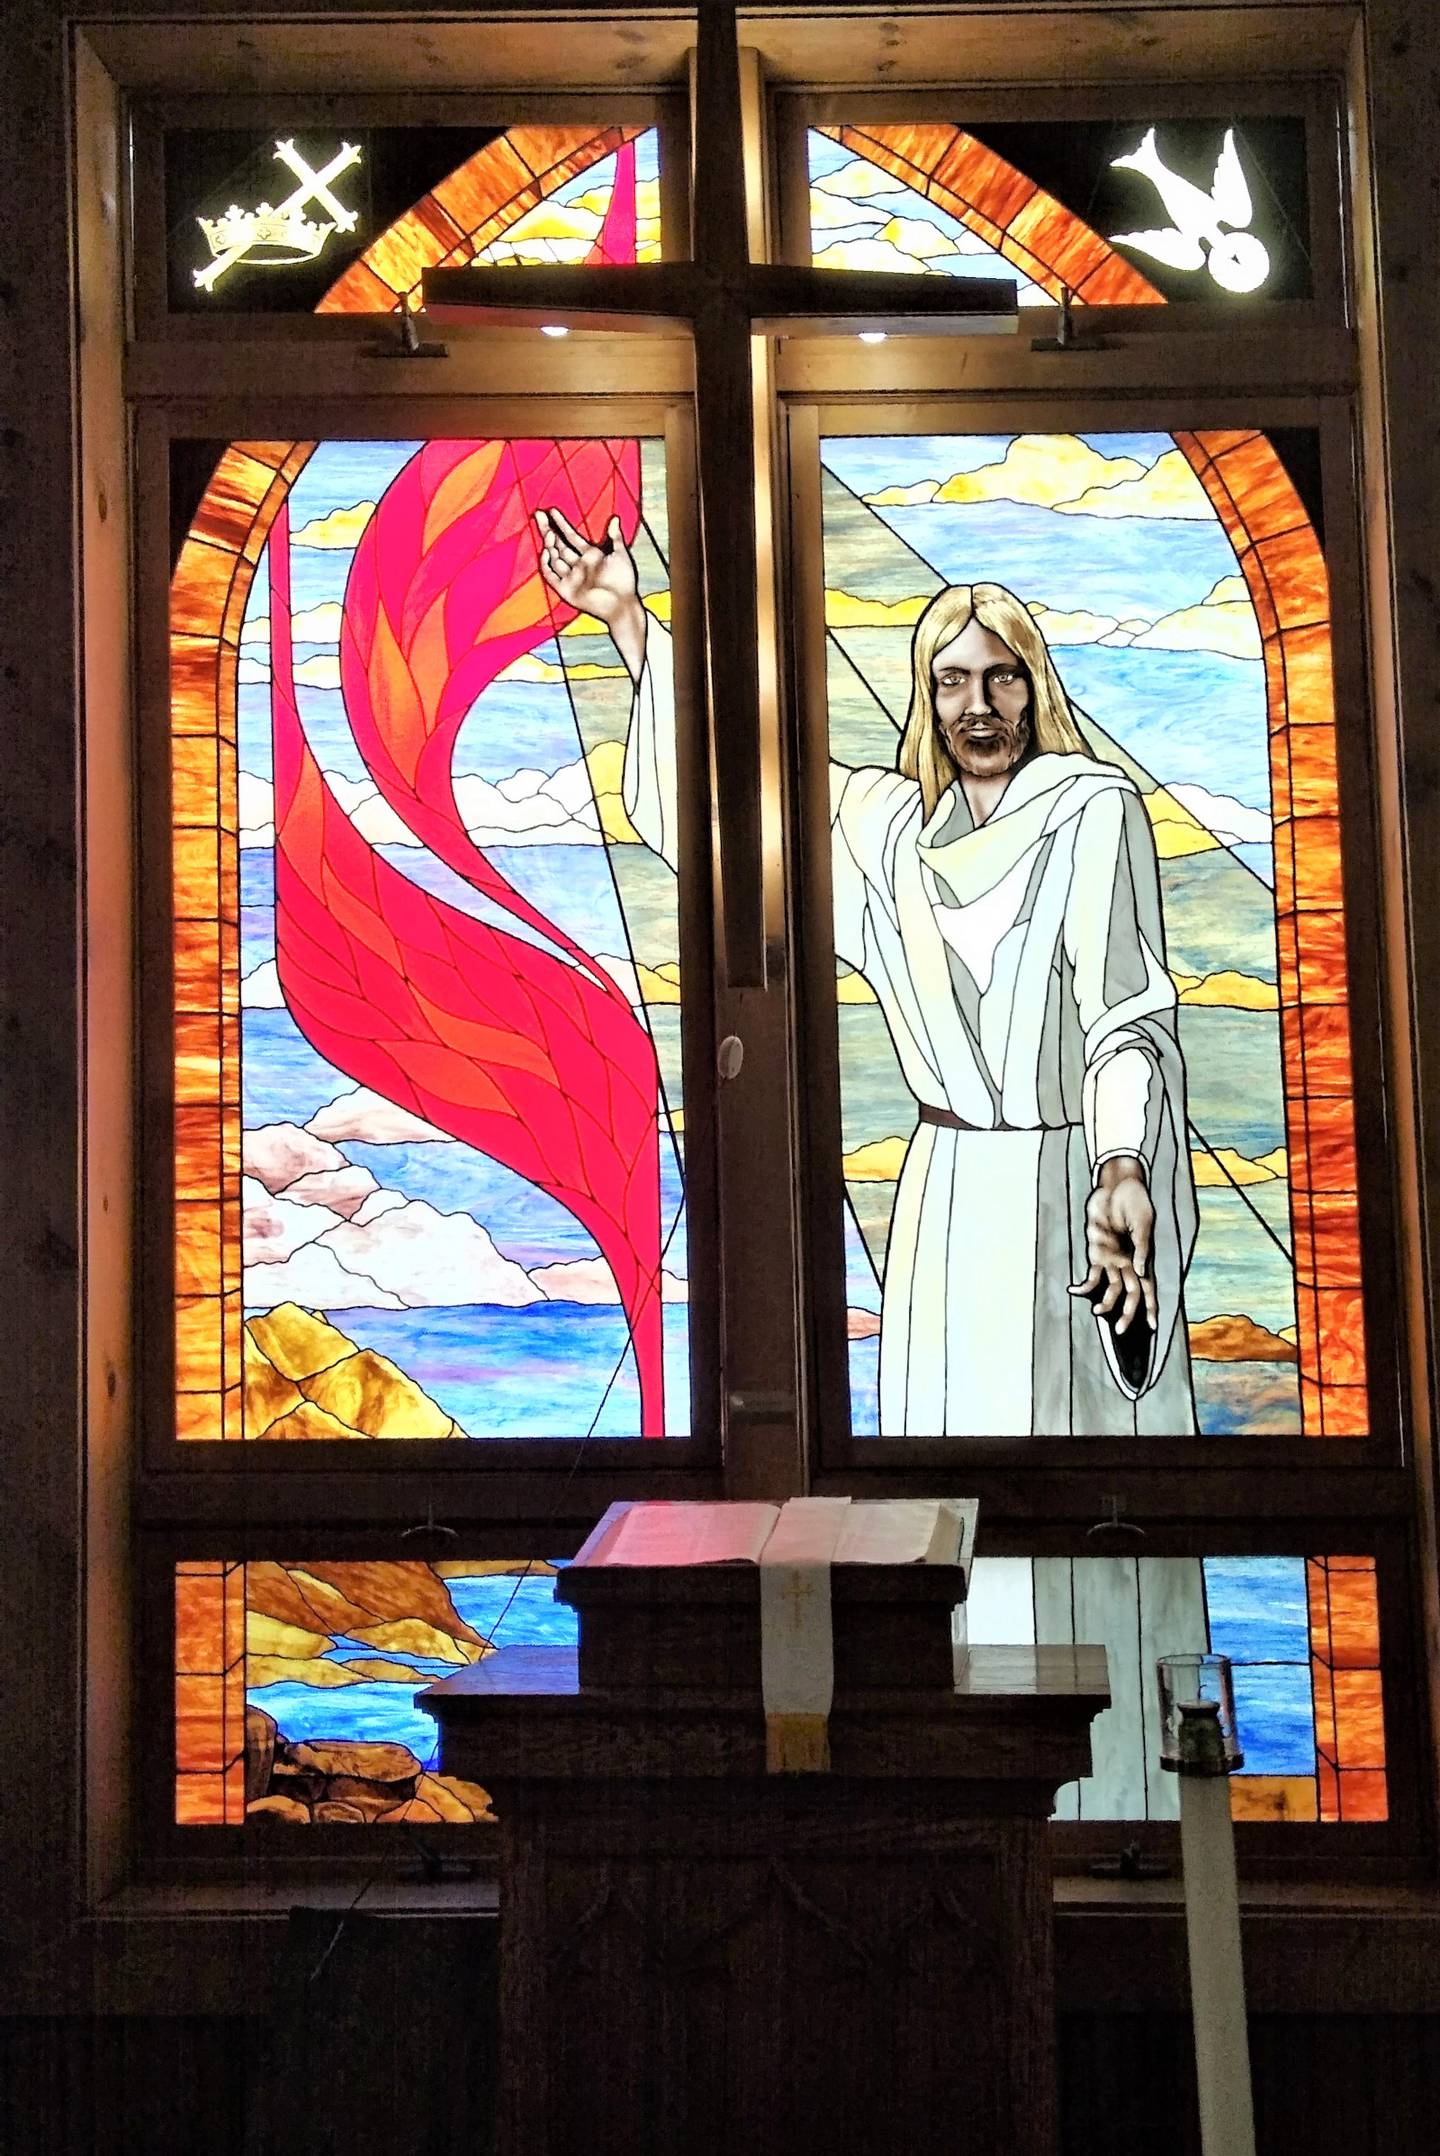 A stained glass window depicting Jesus is featured at the front of Cortland United Methodist Church.